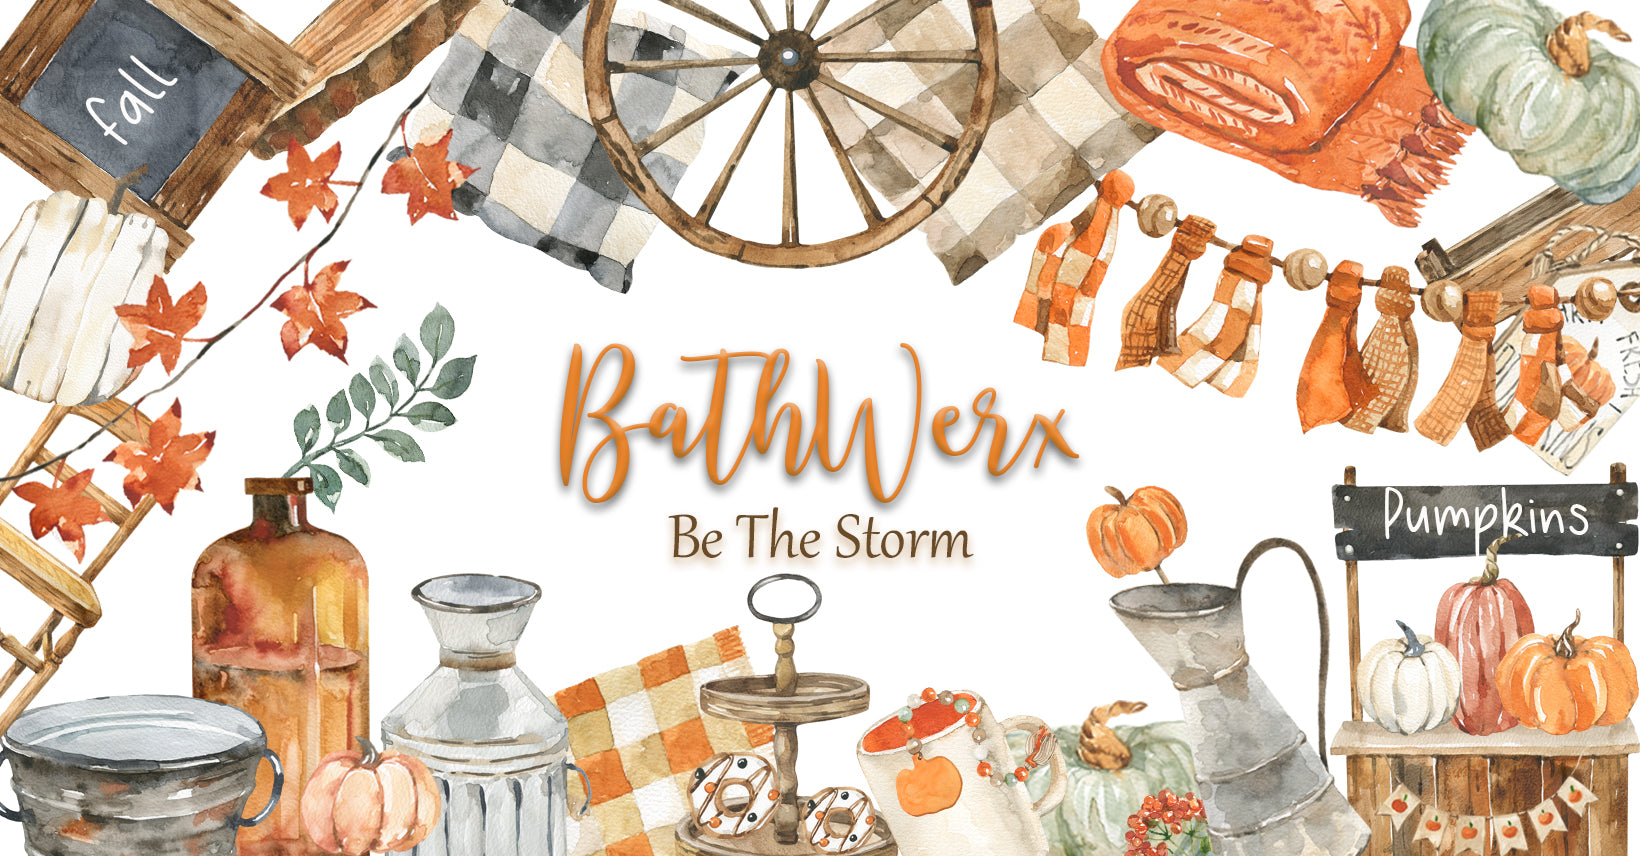 Welcome to BathWerx! Home to unique trendy beauty and skincare.